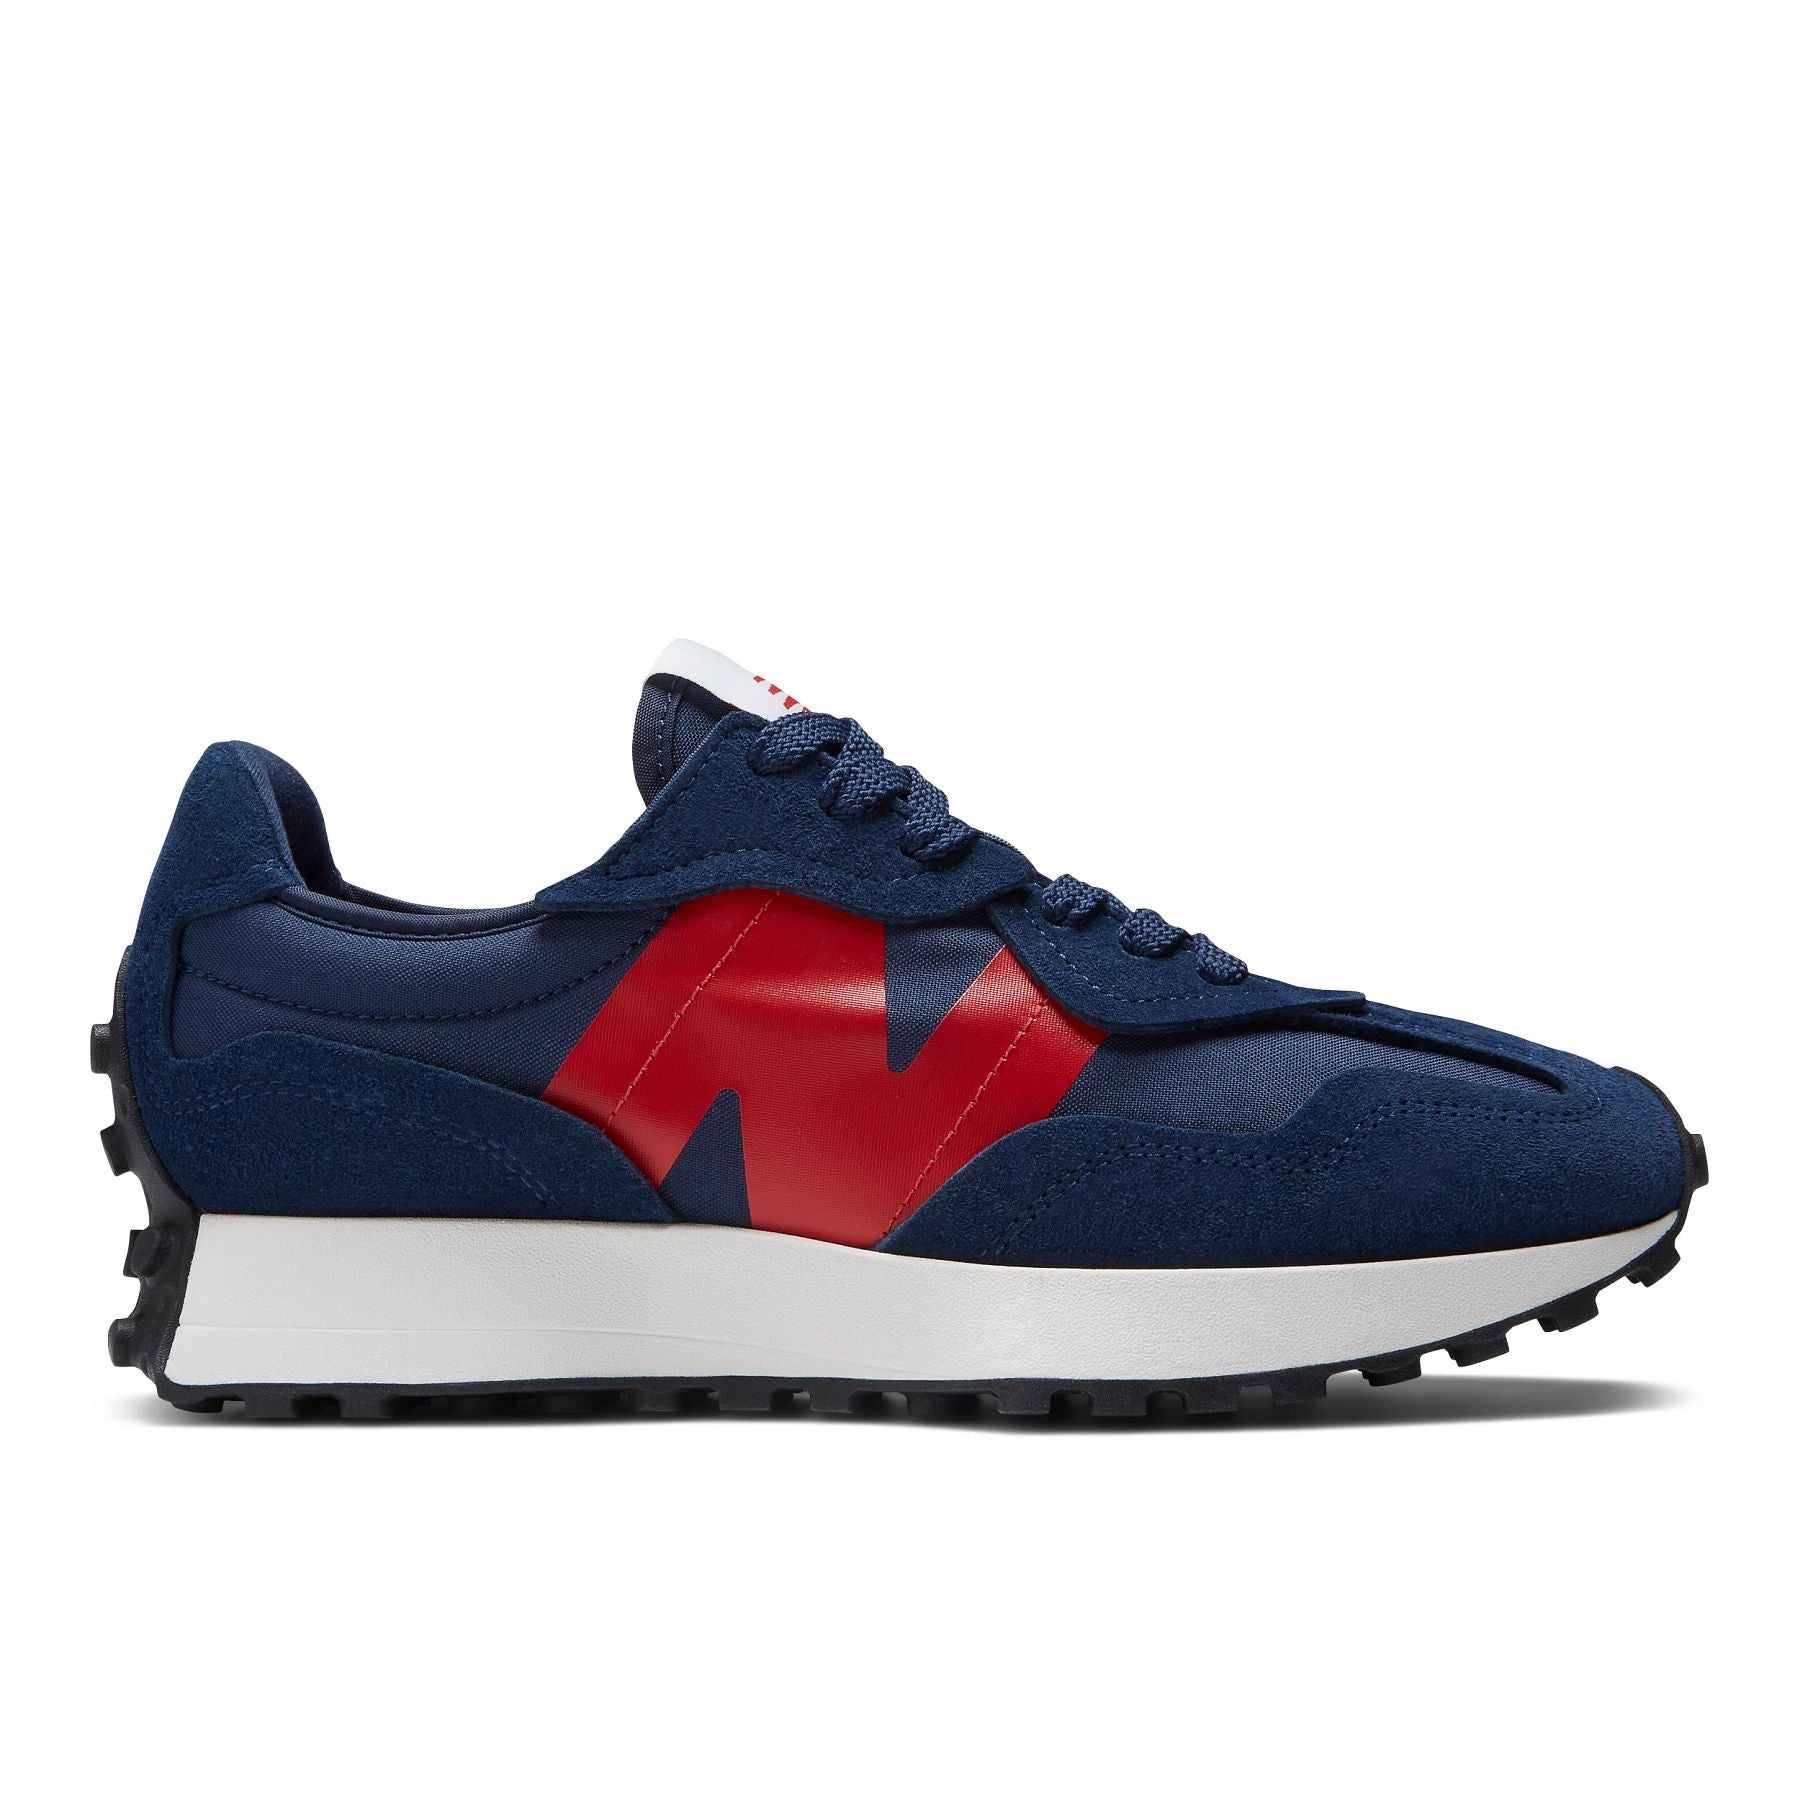 Lateral view of the Men's New Balance lifestyle 327 shoe in the color NB Navy